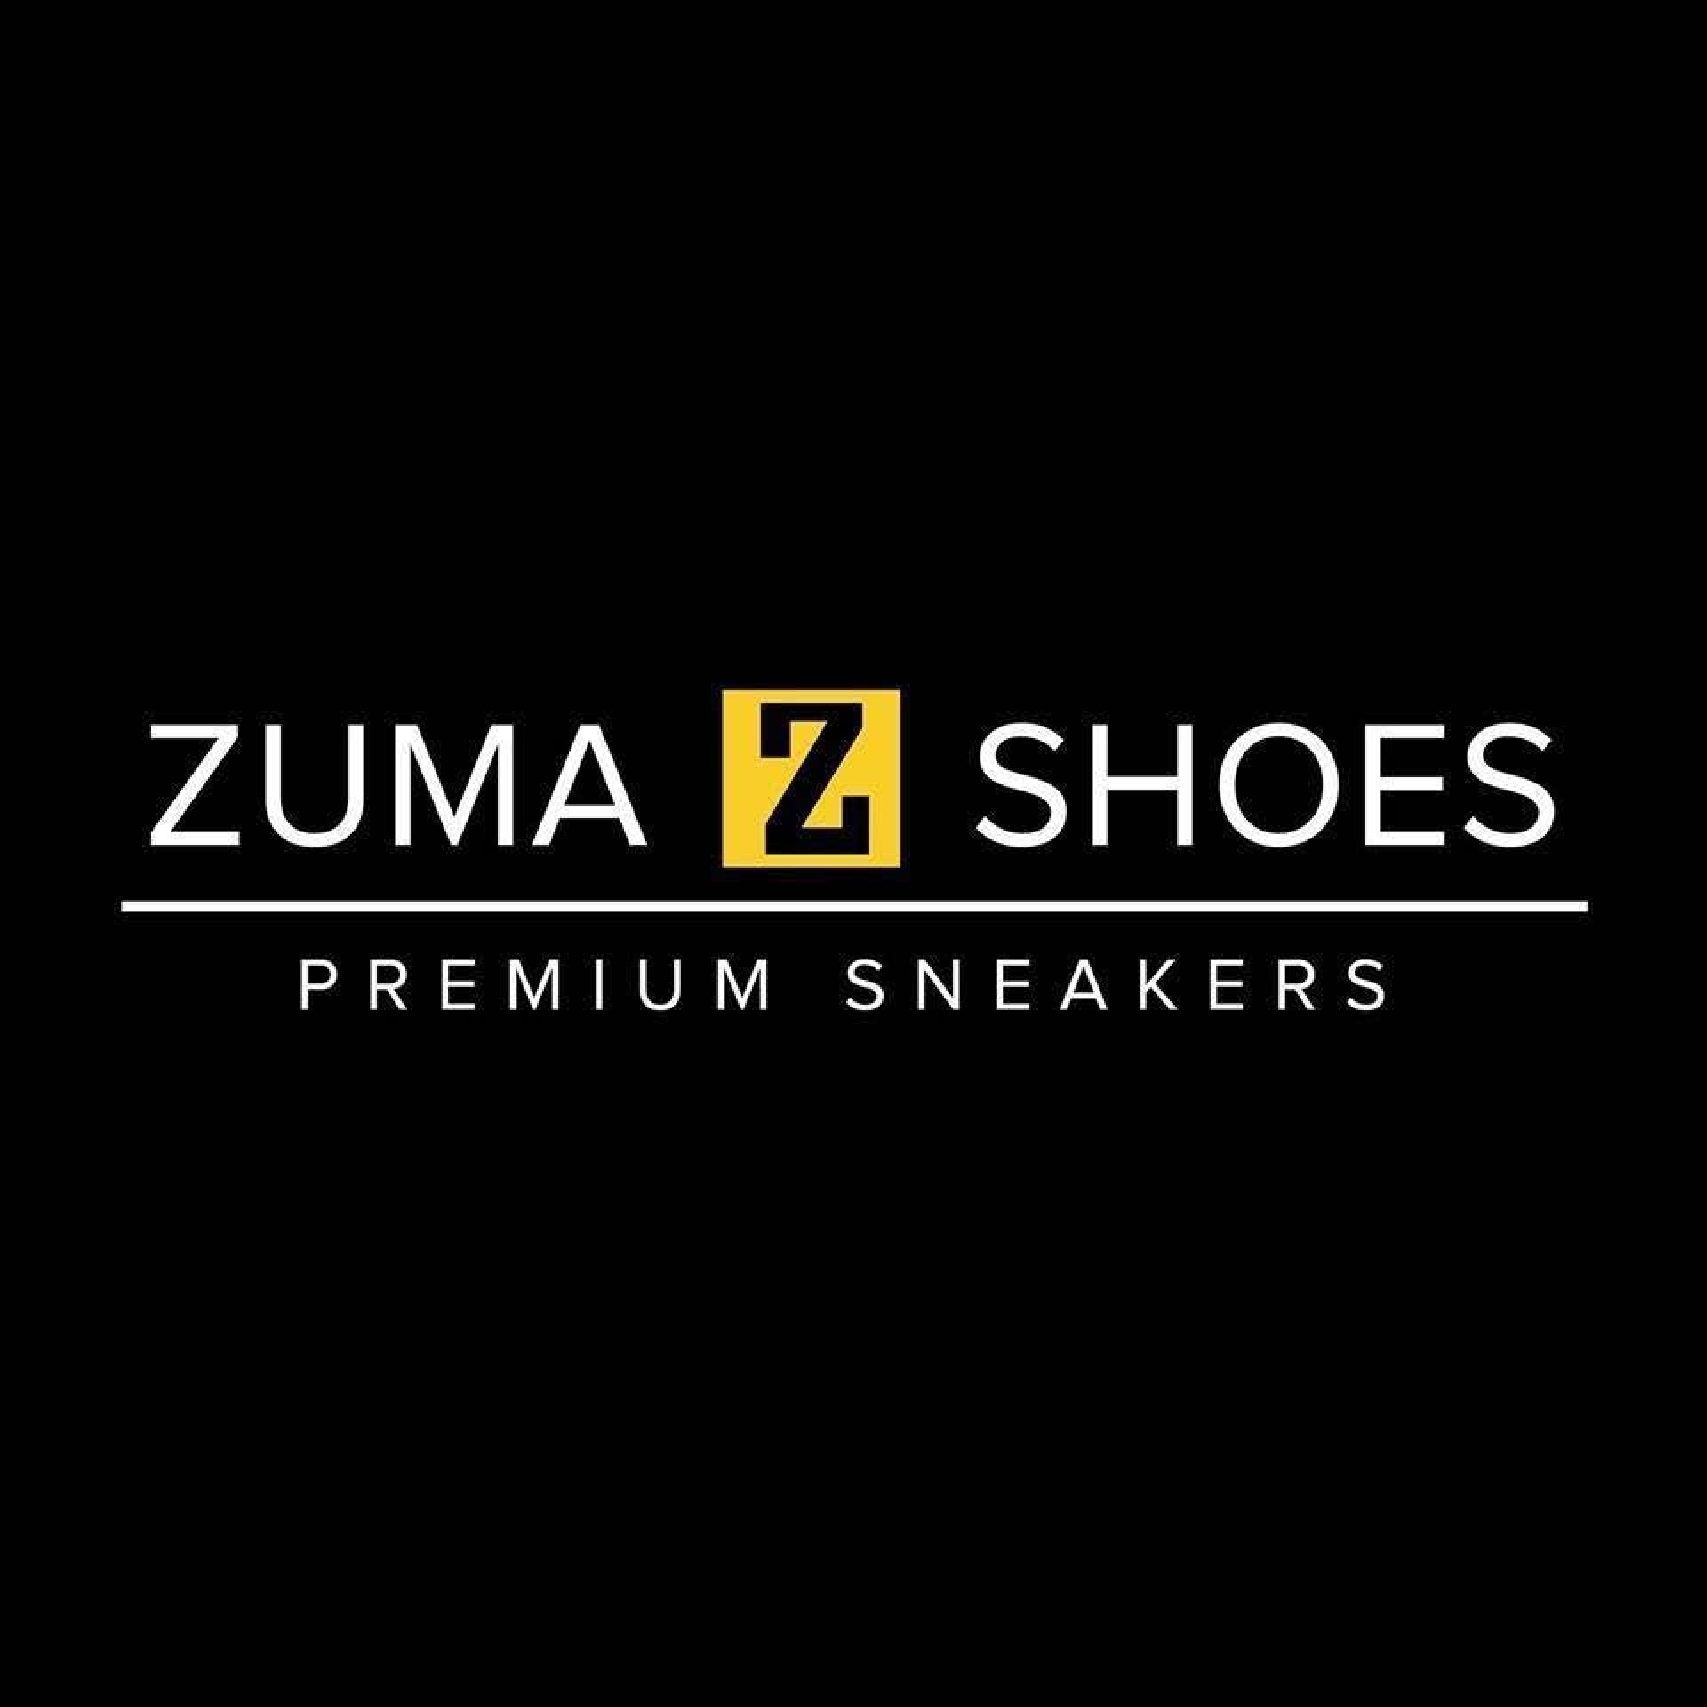 Zuma shoes, premium sneakers partnership with Fade Room